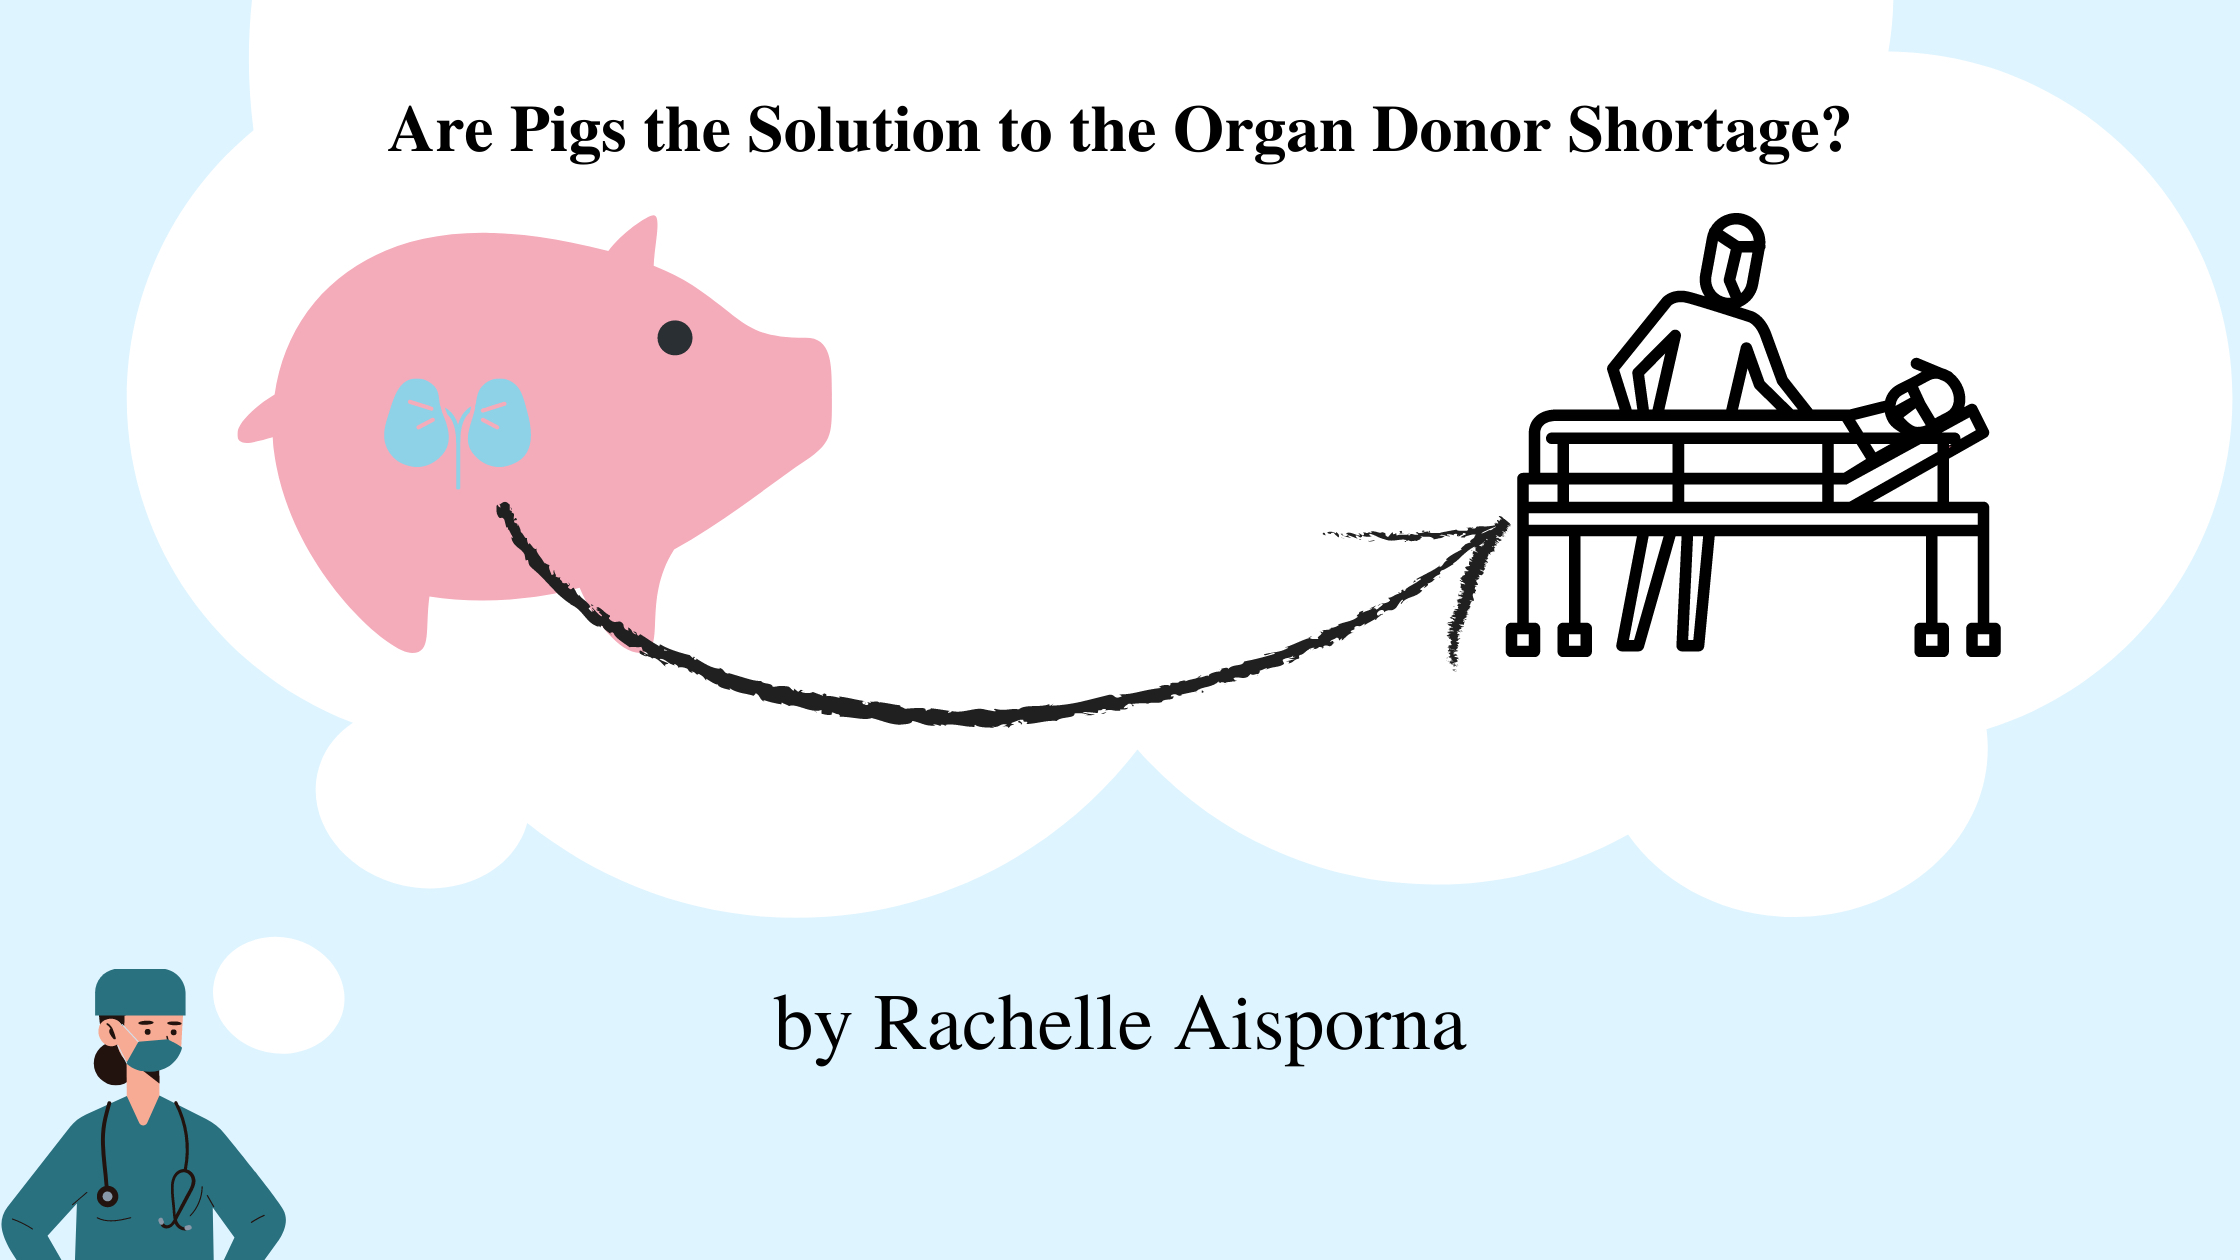 Are Pigs the Solution to the Organ Donor Shortage?